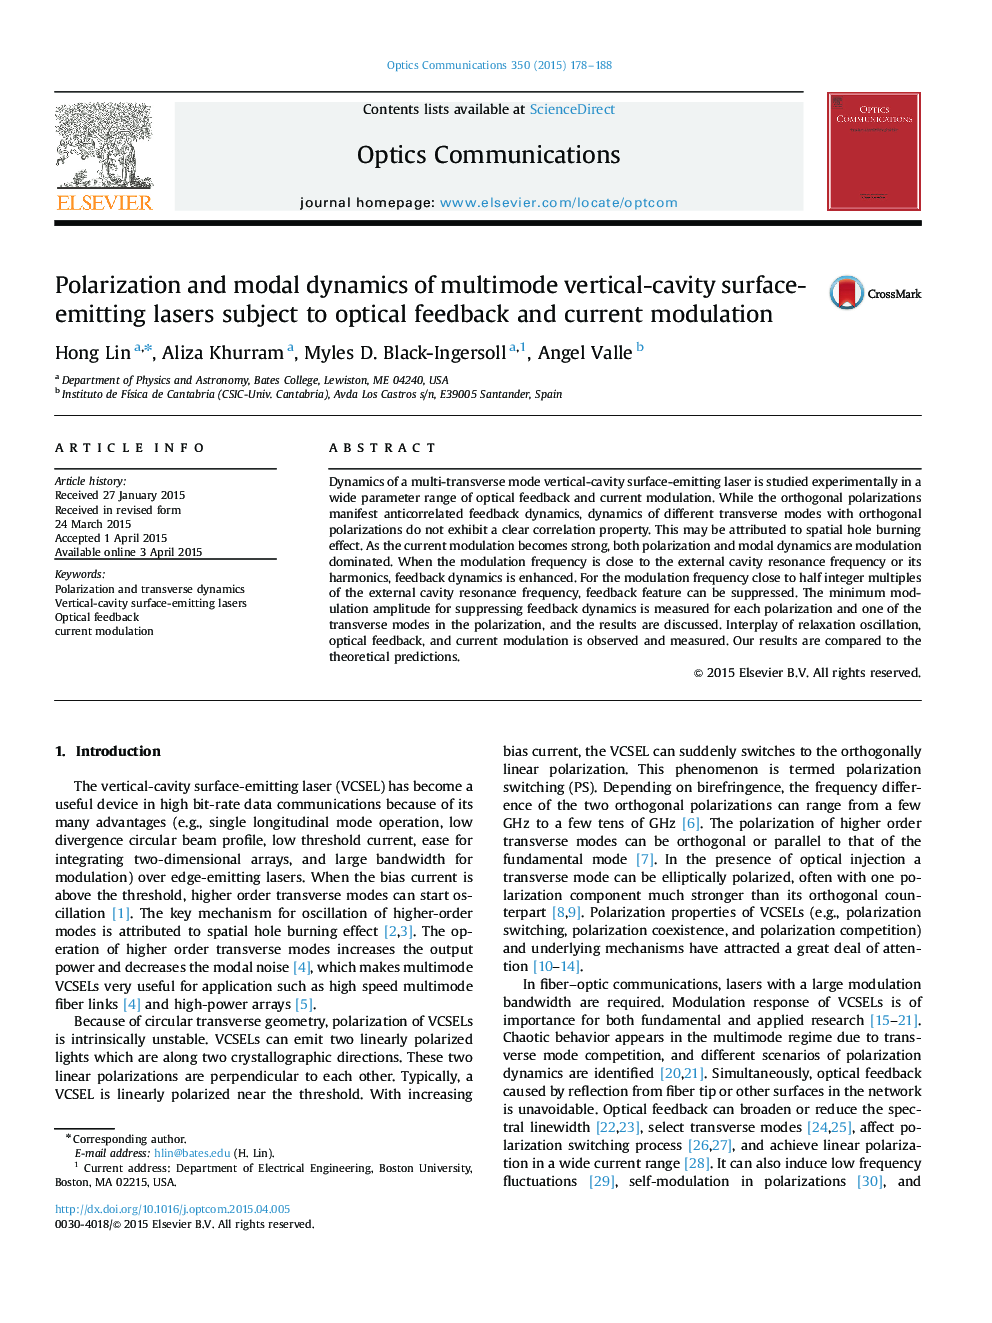 Polarization and modal dynamics of multimode vertical-cavity surface-emitting lasers subject to optical feedback and current modulation